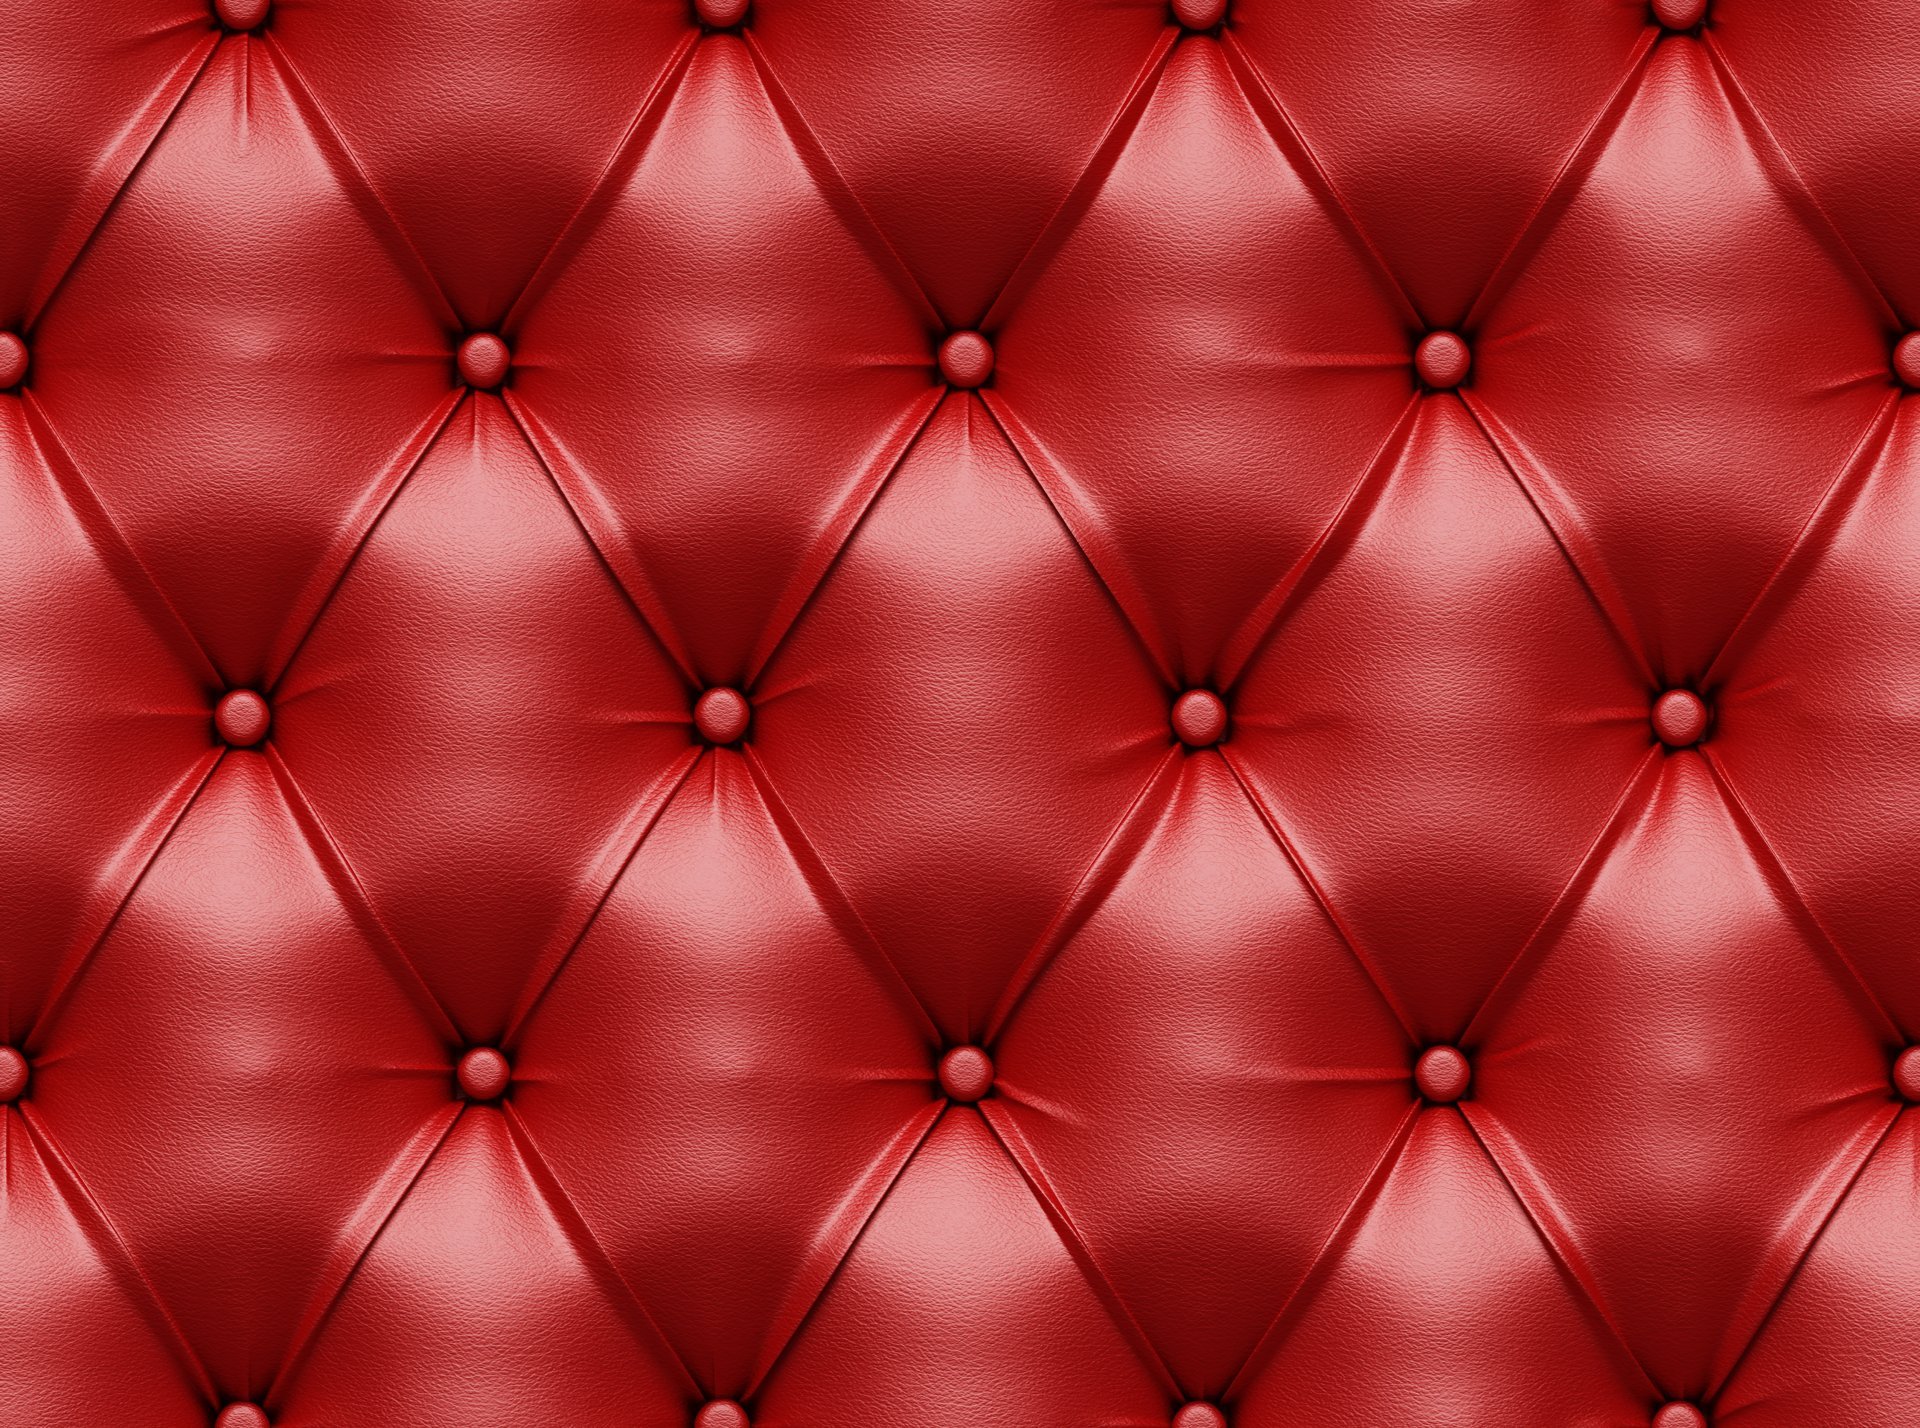 Leather Luxury Background Textures Interior Red HD Wallpaper